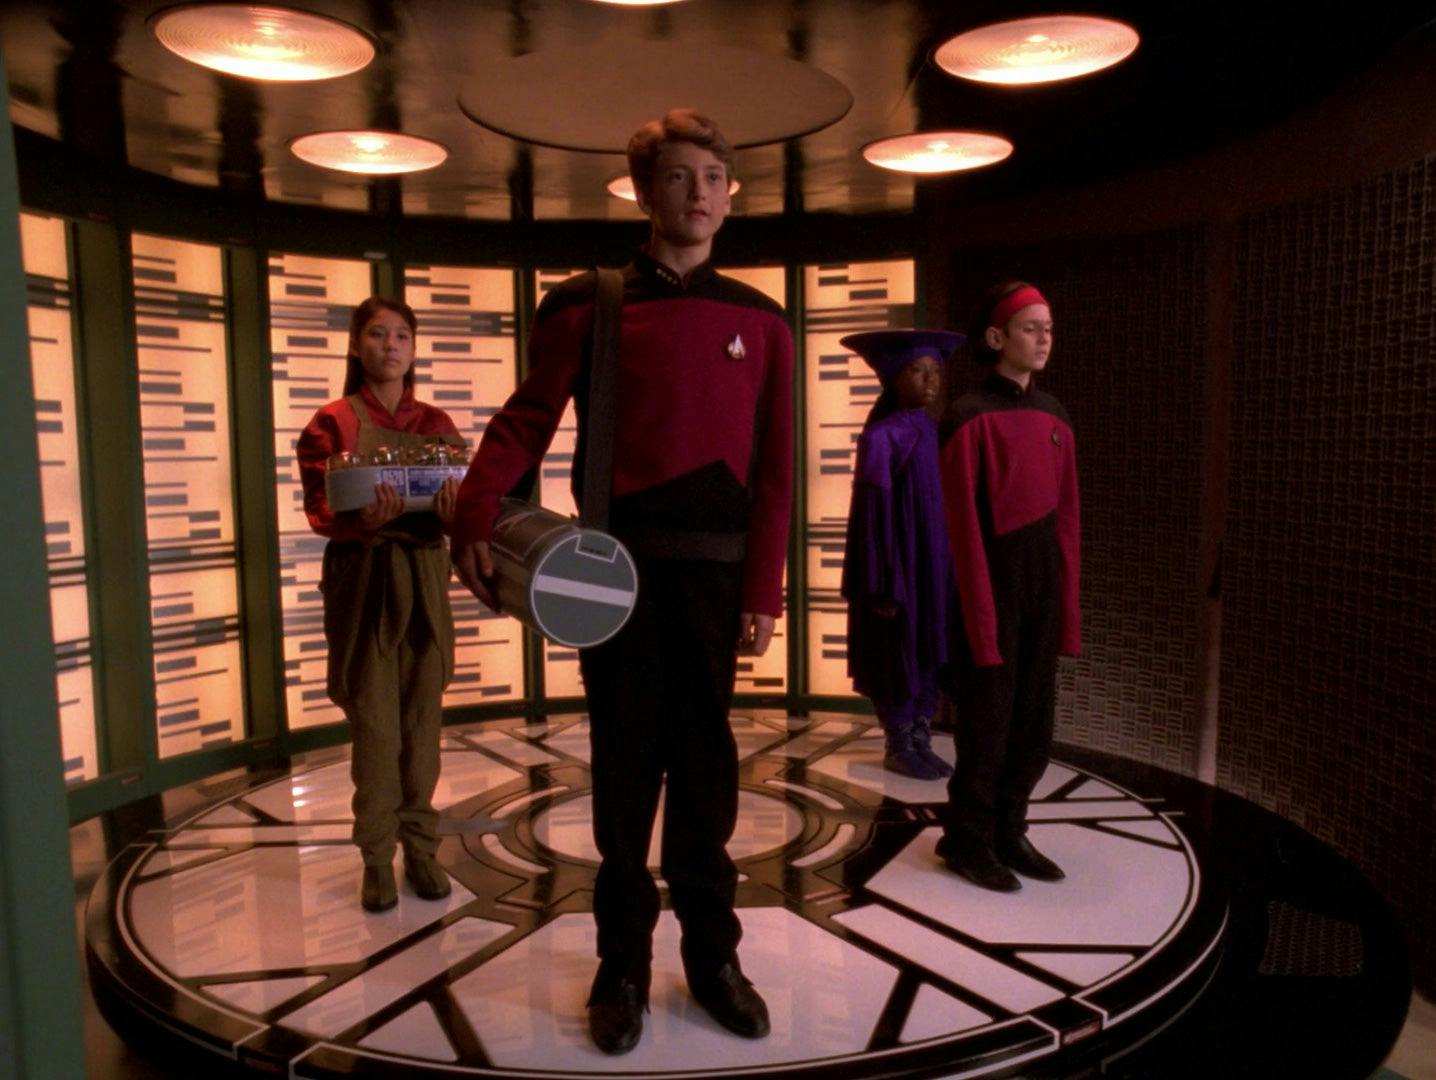 Twelve year old versions of Keiko, Picard, Ro Laren, and Guinan stand on the transporter pad.